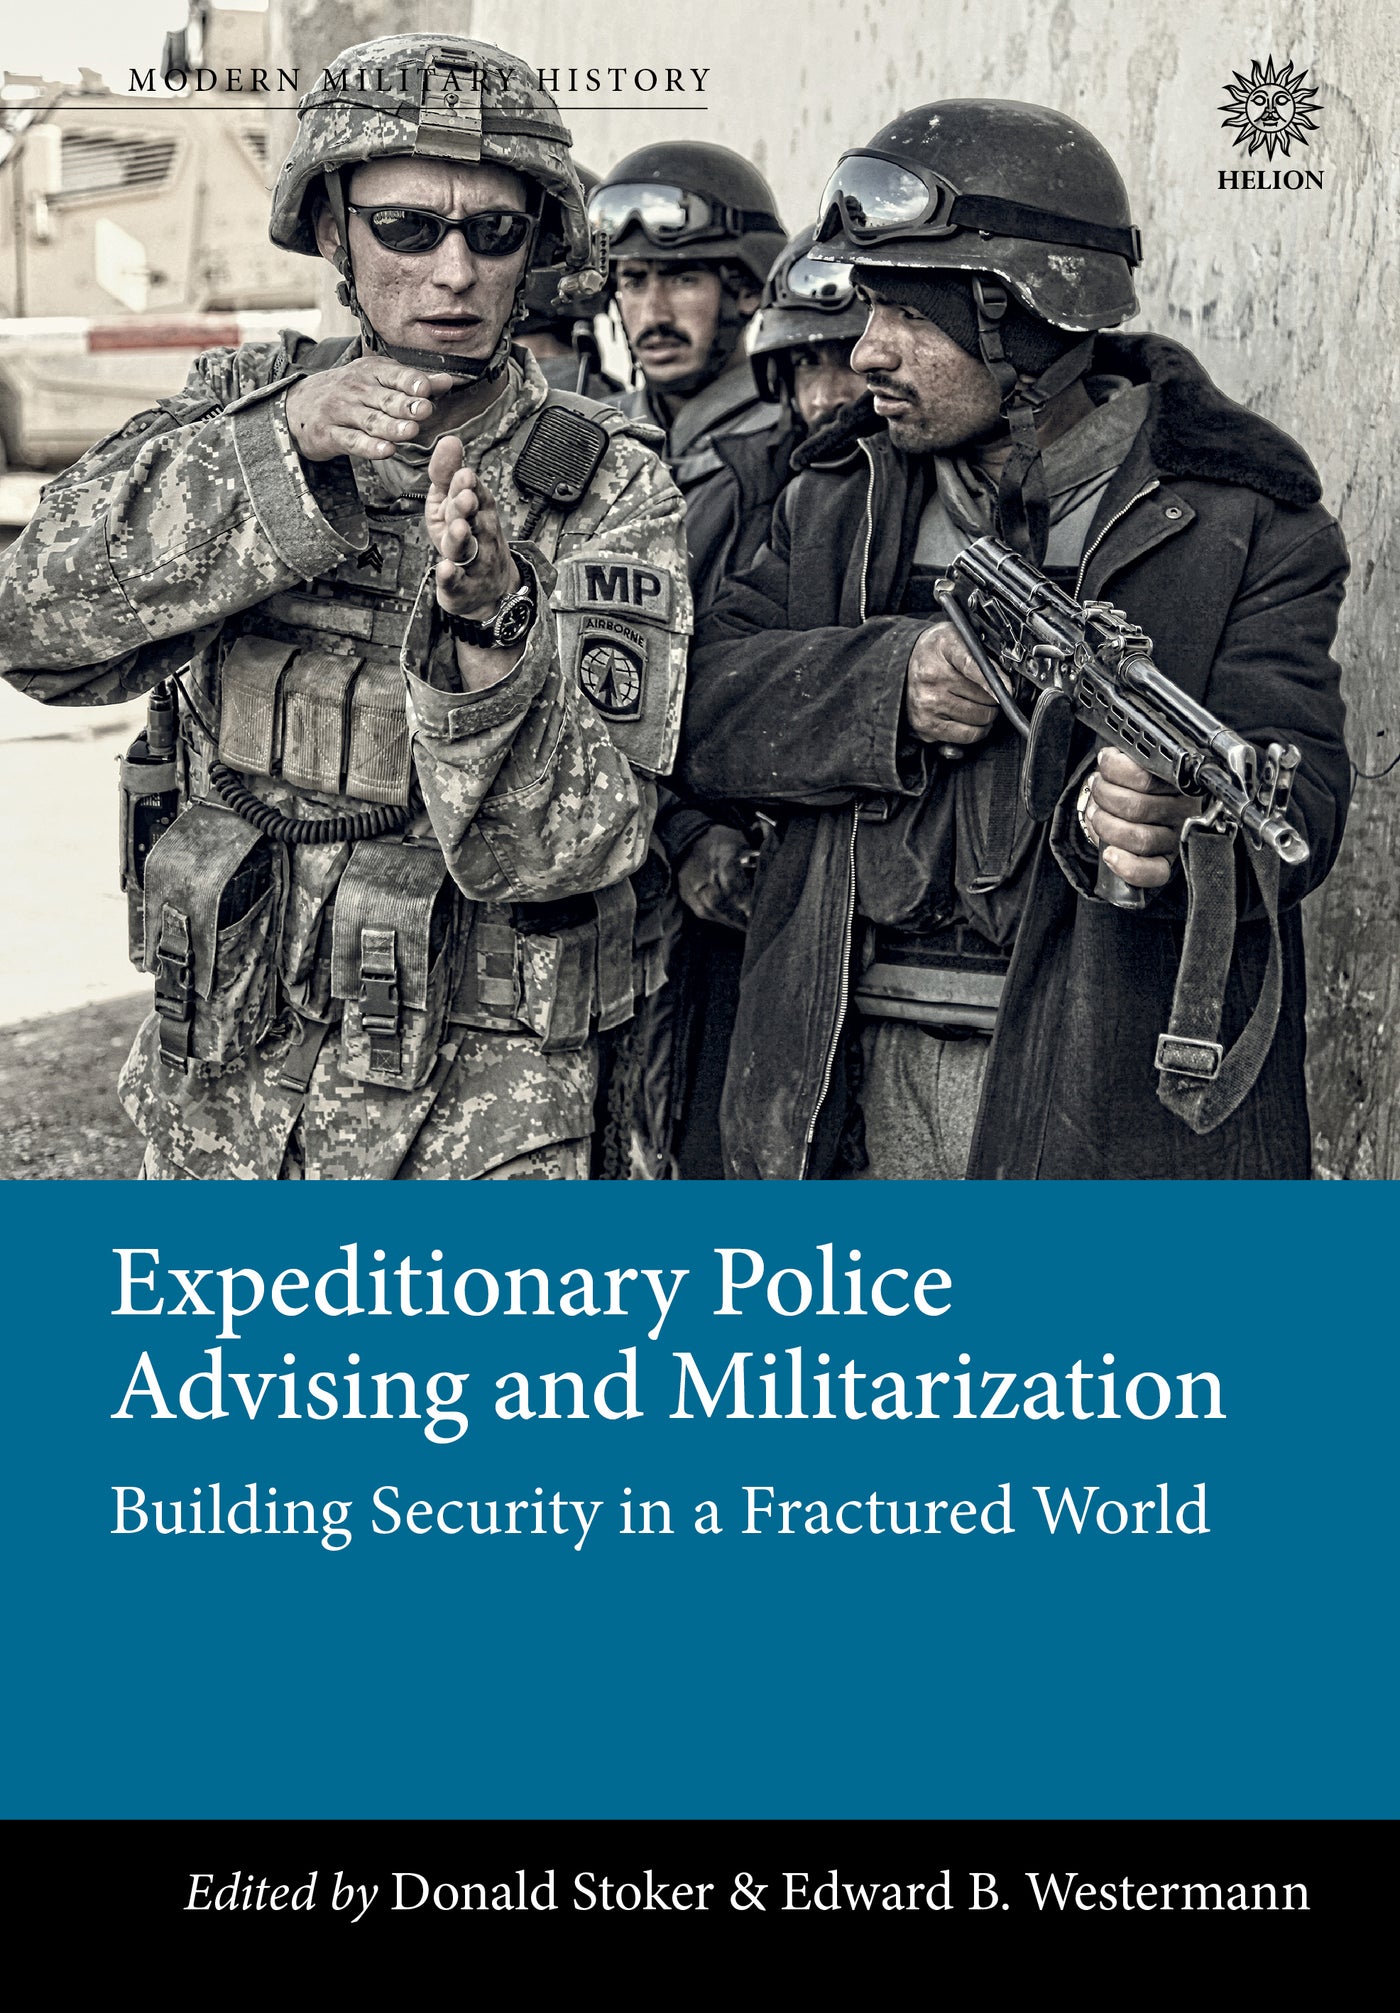 Expeditionary Police Advising and Militarization